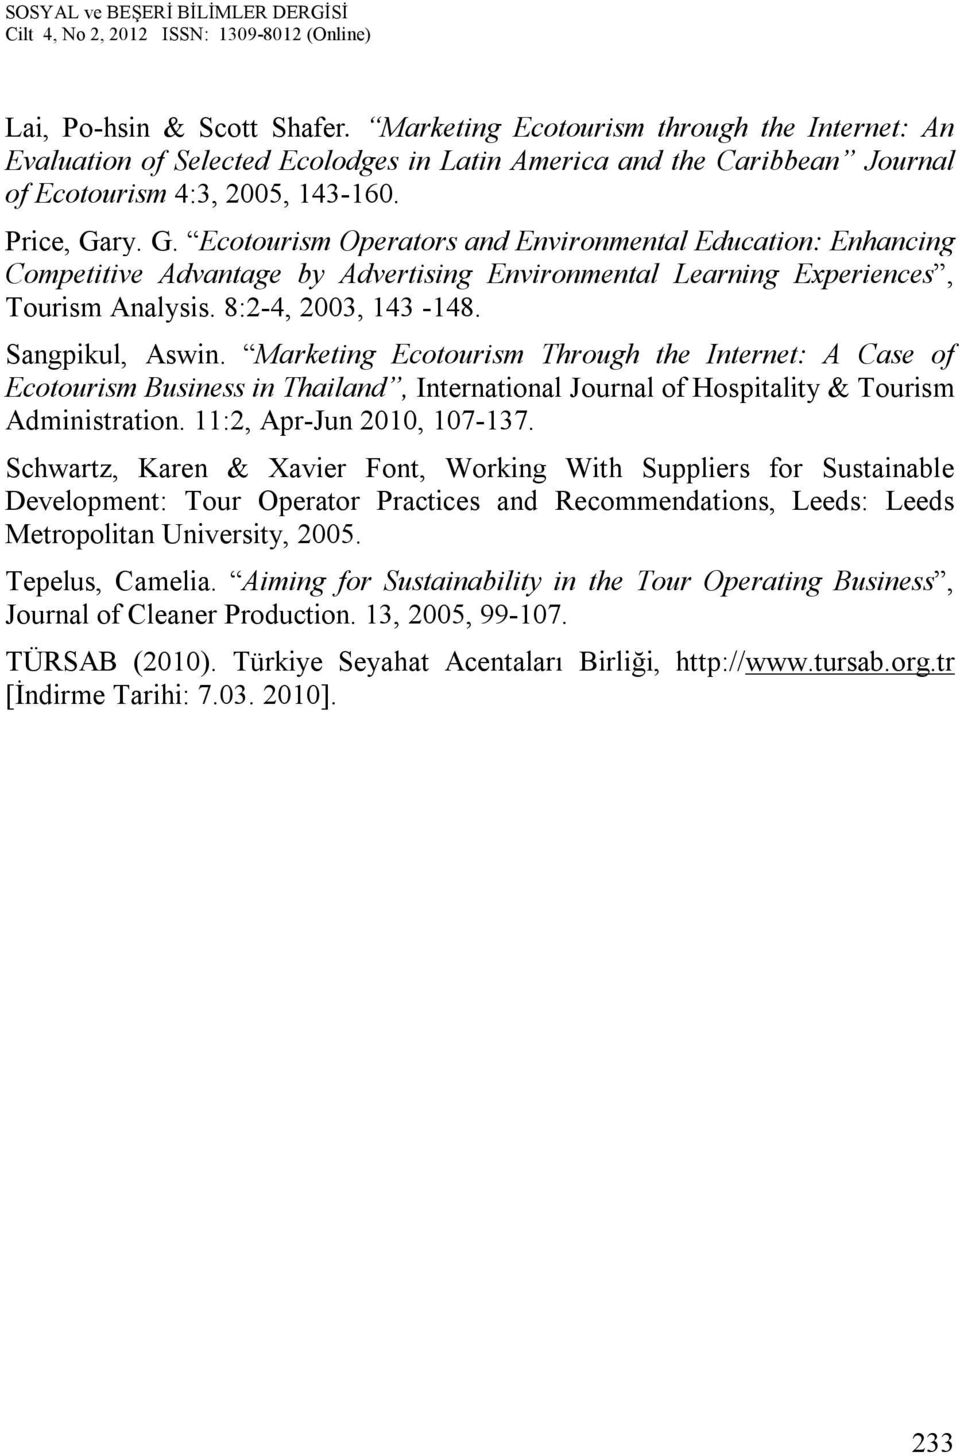 Marketing Ecotourism Through the Internet: A Case of Ecotourism Business in Thailand, International Journal of Hospitality & Tourism Administration. 11:2, Apr-Jun 2010, 107-137.